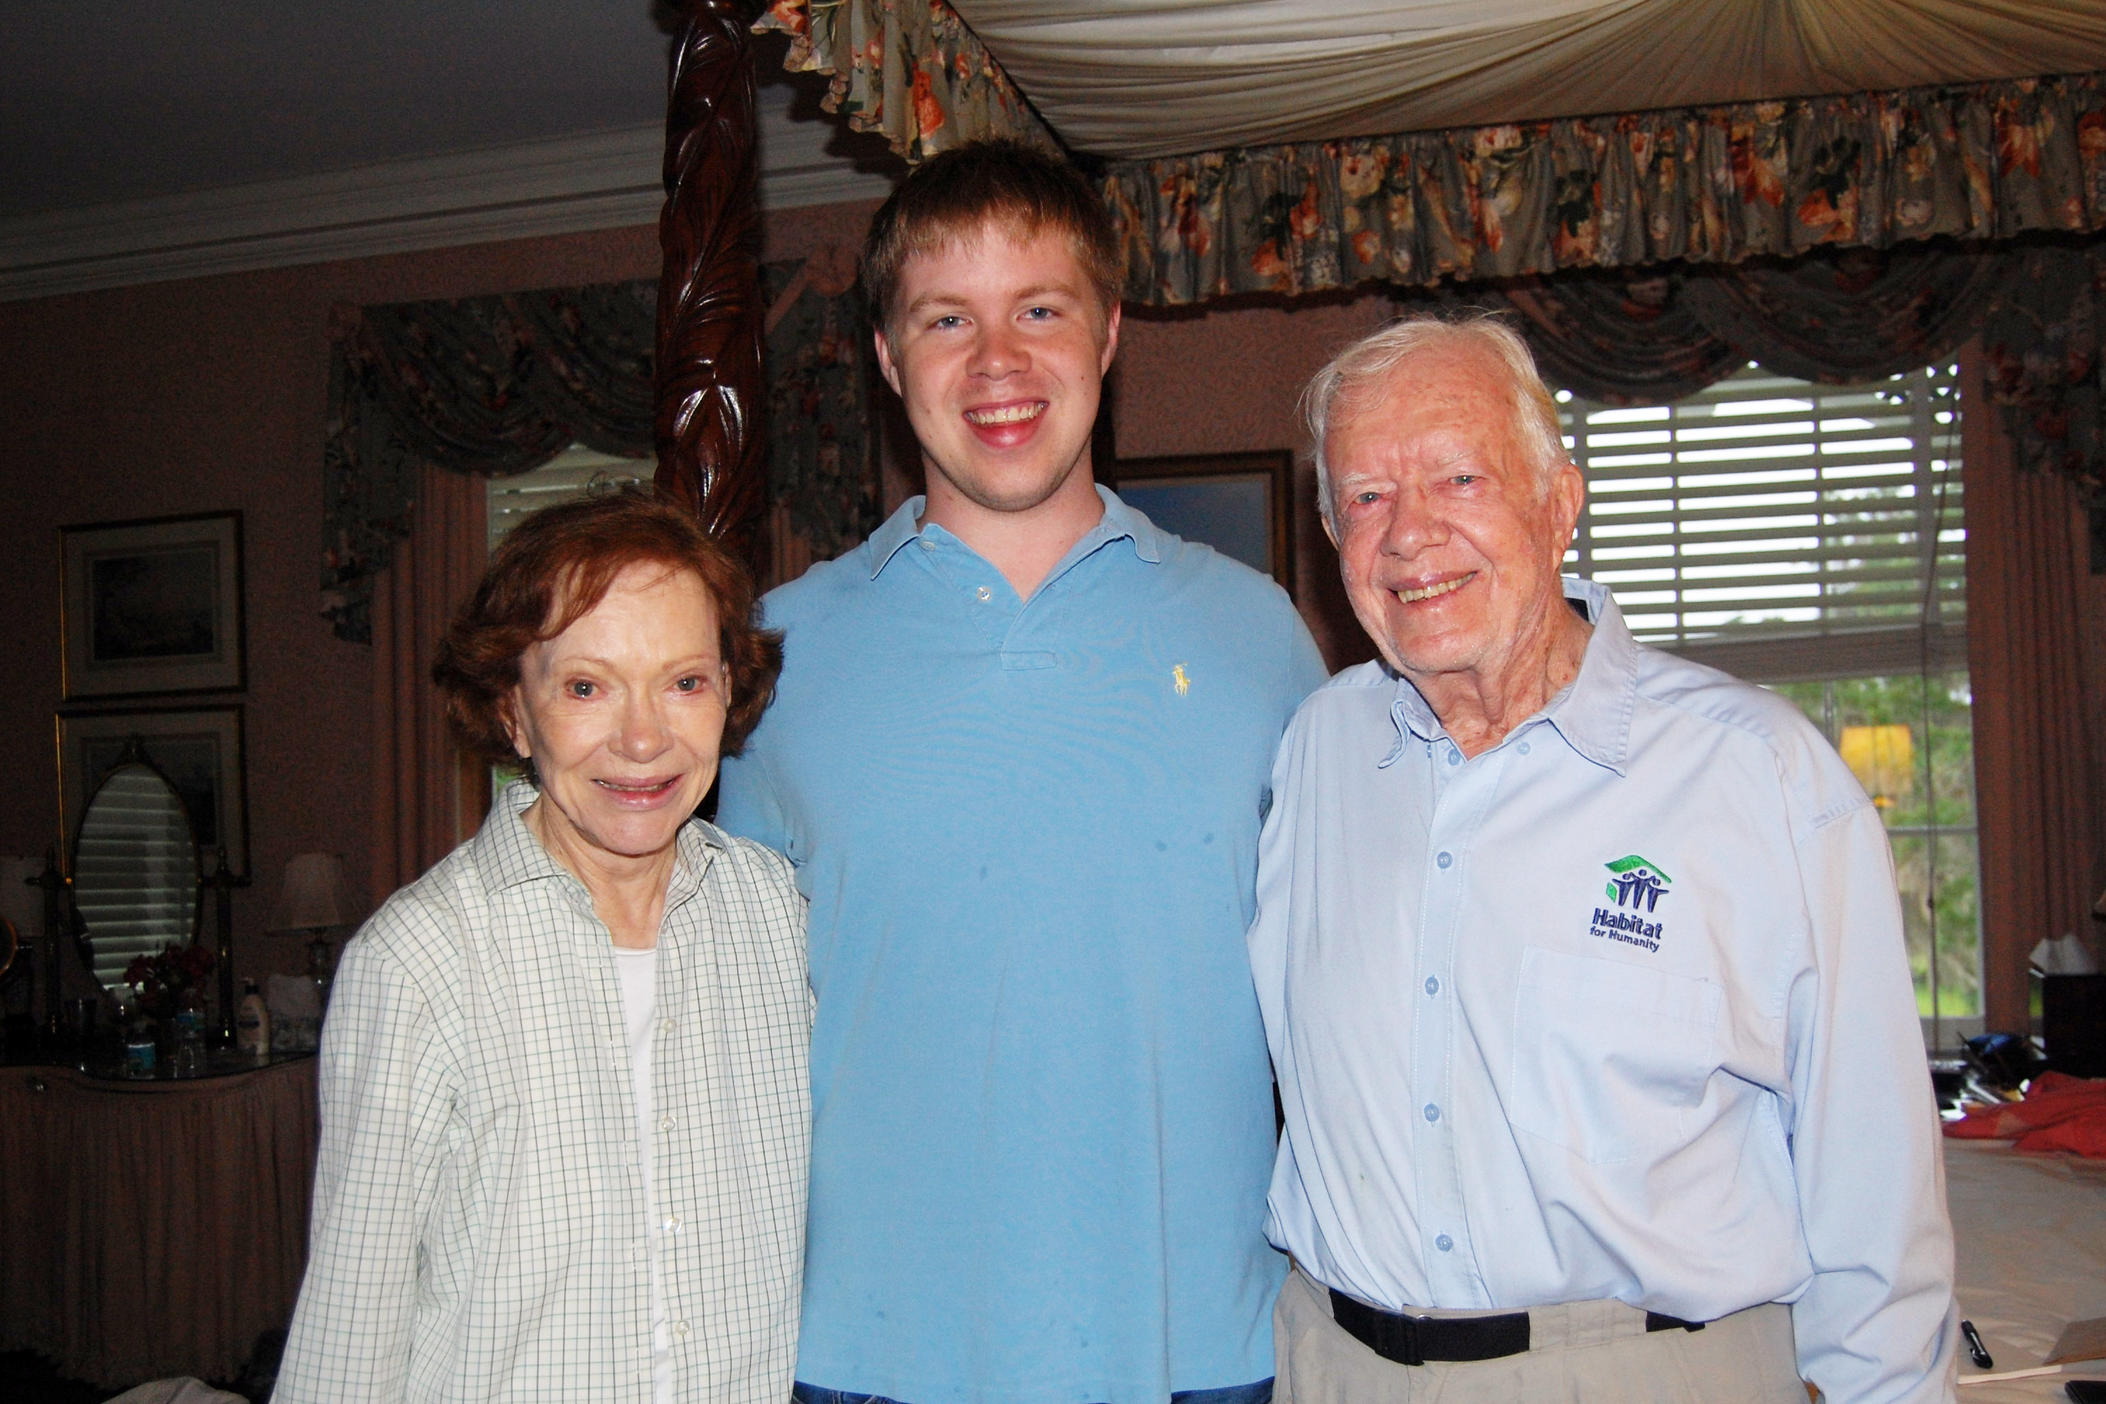 Josh Carter with his grandparents, Jimmy and Rosalynn Carter